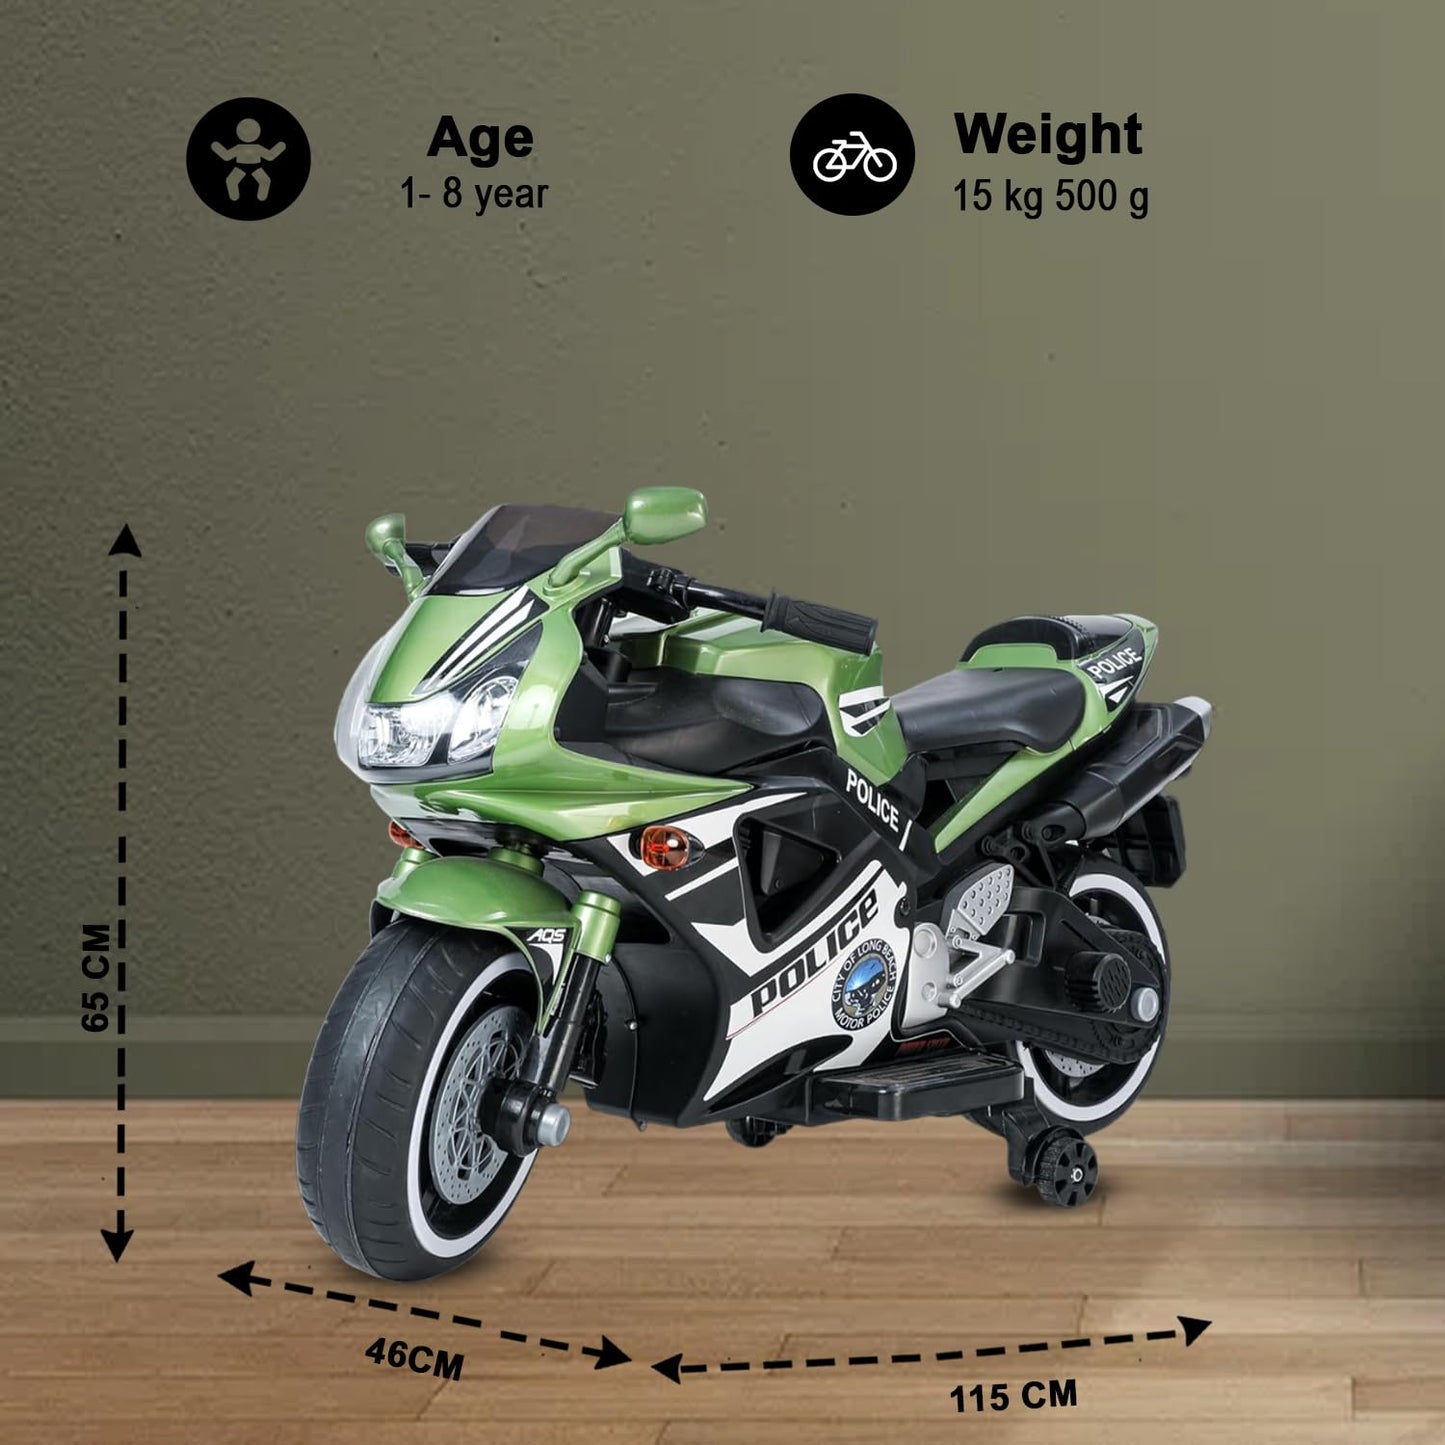 Ayaan Toys Battery-Operated Kids Rib Bike, Ride-on with Music & Lights for Excitement. This Bike is a Thrilling Driving Experience for Children Aged 2 to 8, Electric Police Bike - Green Matalic